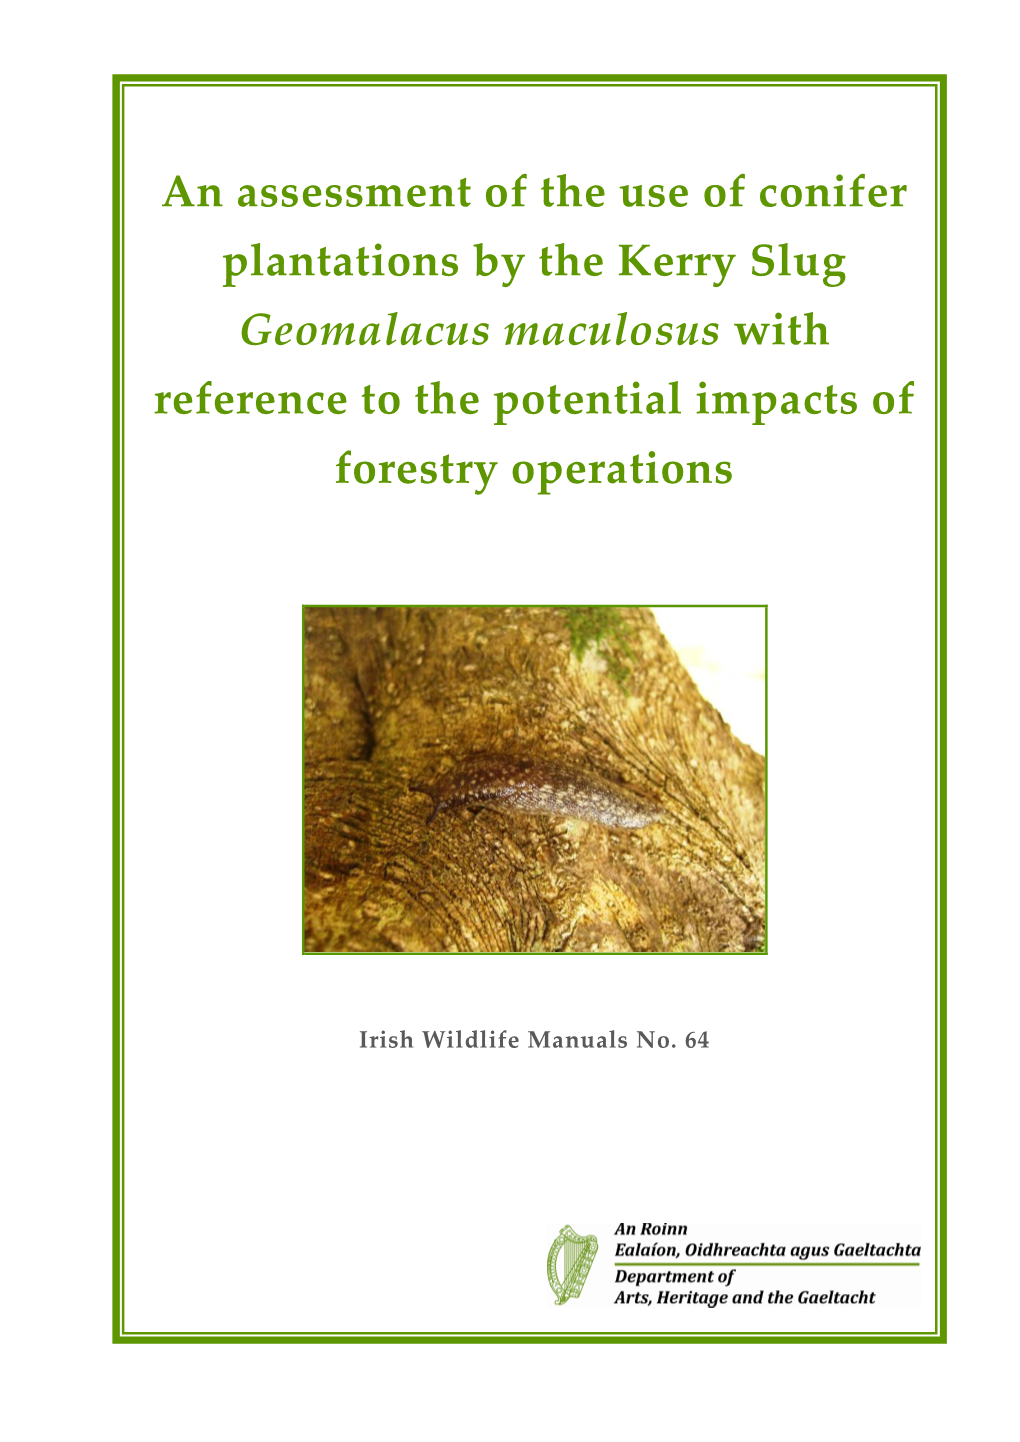 An Assessment of the Use of Conifer Plantations by the Kerry Slug Geomalacus Maculosus with Reference to the Potential Impacts of Forestry Operations